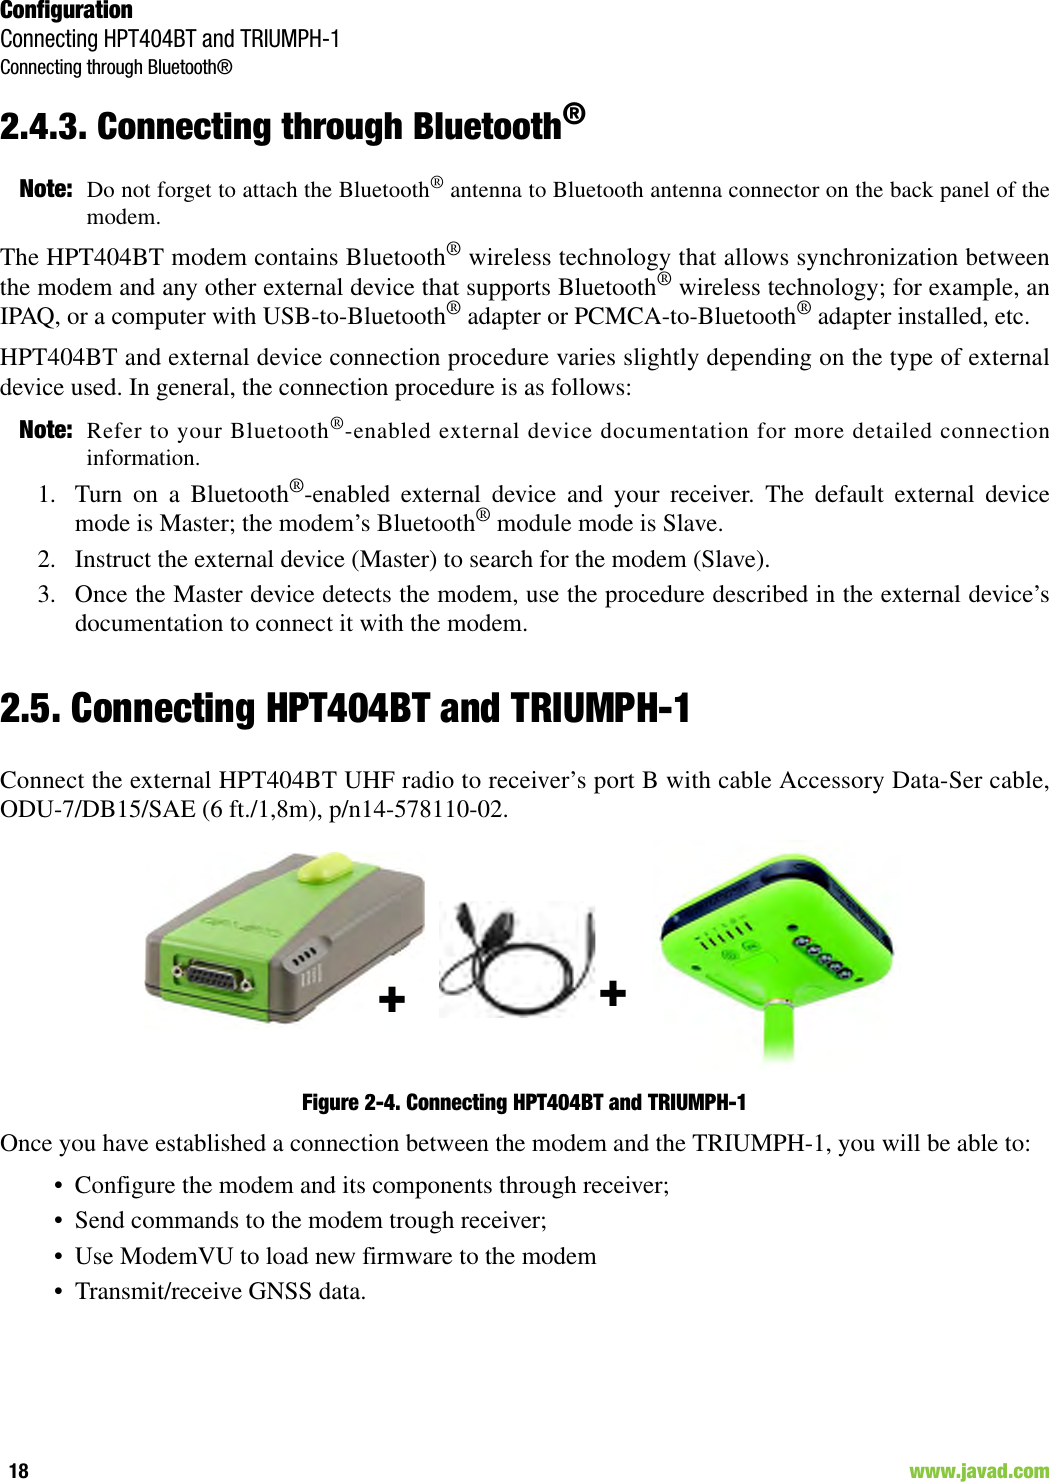 ConfigurationConnecting HPT404BT and TRIUMPH-1Connecting through Bluetooth®18                                                                                                                     www.javad.com2.4.3. Connecting through Bluetooth®Note: Do not forget to attach the Bluetooth® antenna to Bluetooth antenna connector on the back panel of themodem.The HPT404BT modem contains Bluetooth® wireless technology that allows synchronization betweenthe modem and any other external device that supports Bluetooth® wireless technology; for example, anIPAQ, or a computer with USB-to-Bluetooth® adapter or PCMCA-to-Bluetooth® adapter installed, etc.HPT404BT and external device connection procedure varies slightly depending on the type of externaldevice used. In general, the connection procedure is as follows:Note: Refer to your Bluetooth®-enabled external device documentation for more detailed connectioninformation.1. Turn on a Bluetooth®-enabled external device and your receiver. The default external devicemode is Master; the modem’s Bluetooth® module mode is Slave.2. Instruct the external device (Master) to search for the modem (Slave).3. Once the Master device detects the modem, use the procedure described in the external device’sdocumentation to connect it with the modem.2.5. Connecting HPT404BT and TRIUMPH-1Connect the external HPT404BT UHF radio to receiver’s port B with cable Accessory Data-Ser cable,ODU-7/DB15/SAE (6 ft./1,8m), p/n14-578110-02.Figure 2-4. Connecting HPT404BT and TRIUMPH-1Once you have established a connection between the modem and the TRIUMPH-1, you will be able to:• Configure the modem and its components through receiver;• Send commands to the modem trough receiver;• Use ModemVU to load new firmware to the modem• Transmit/receive GNSS data.++